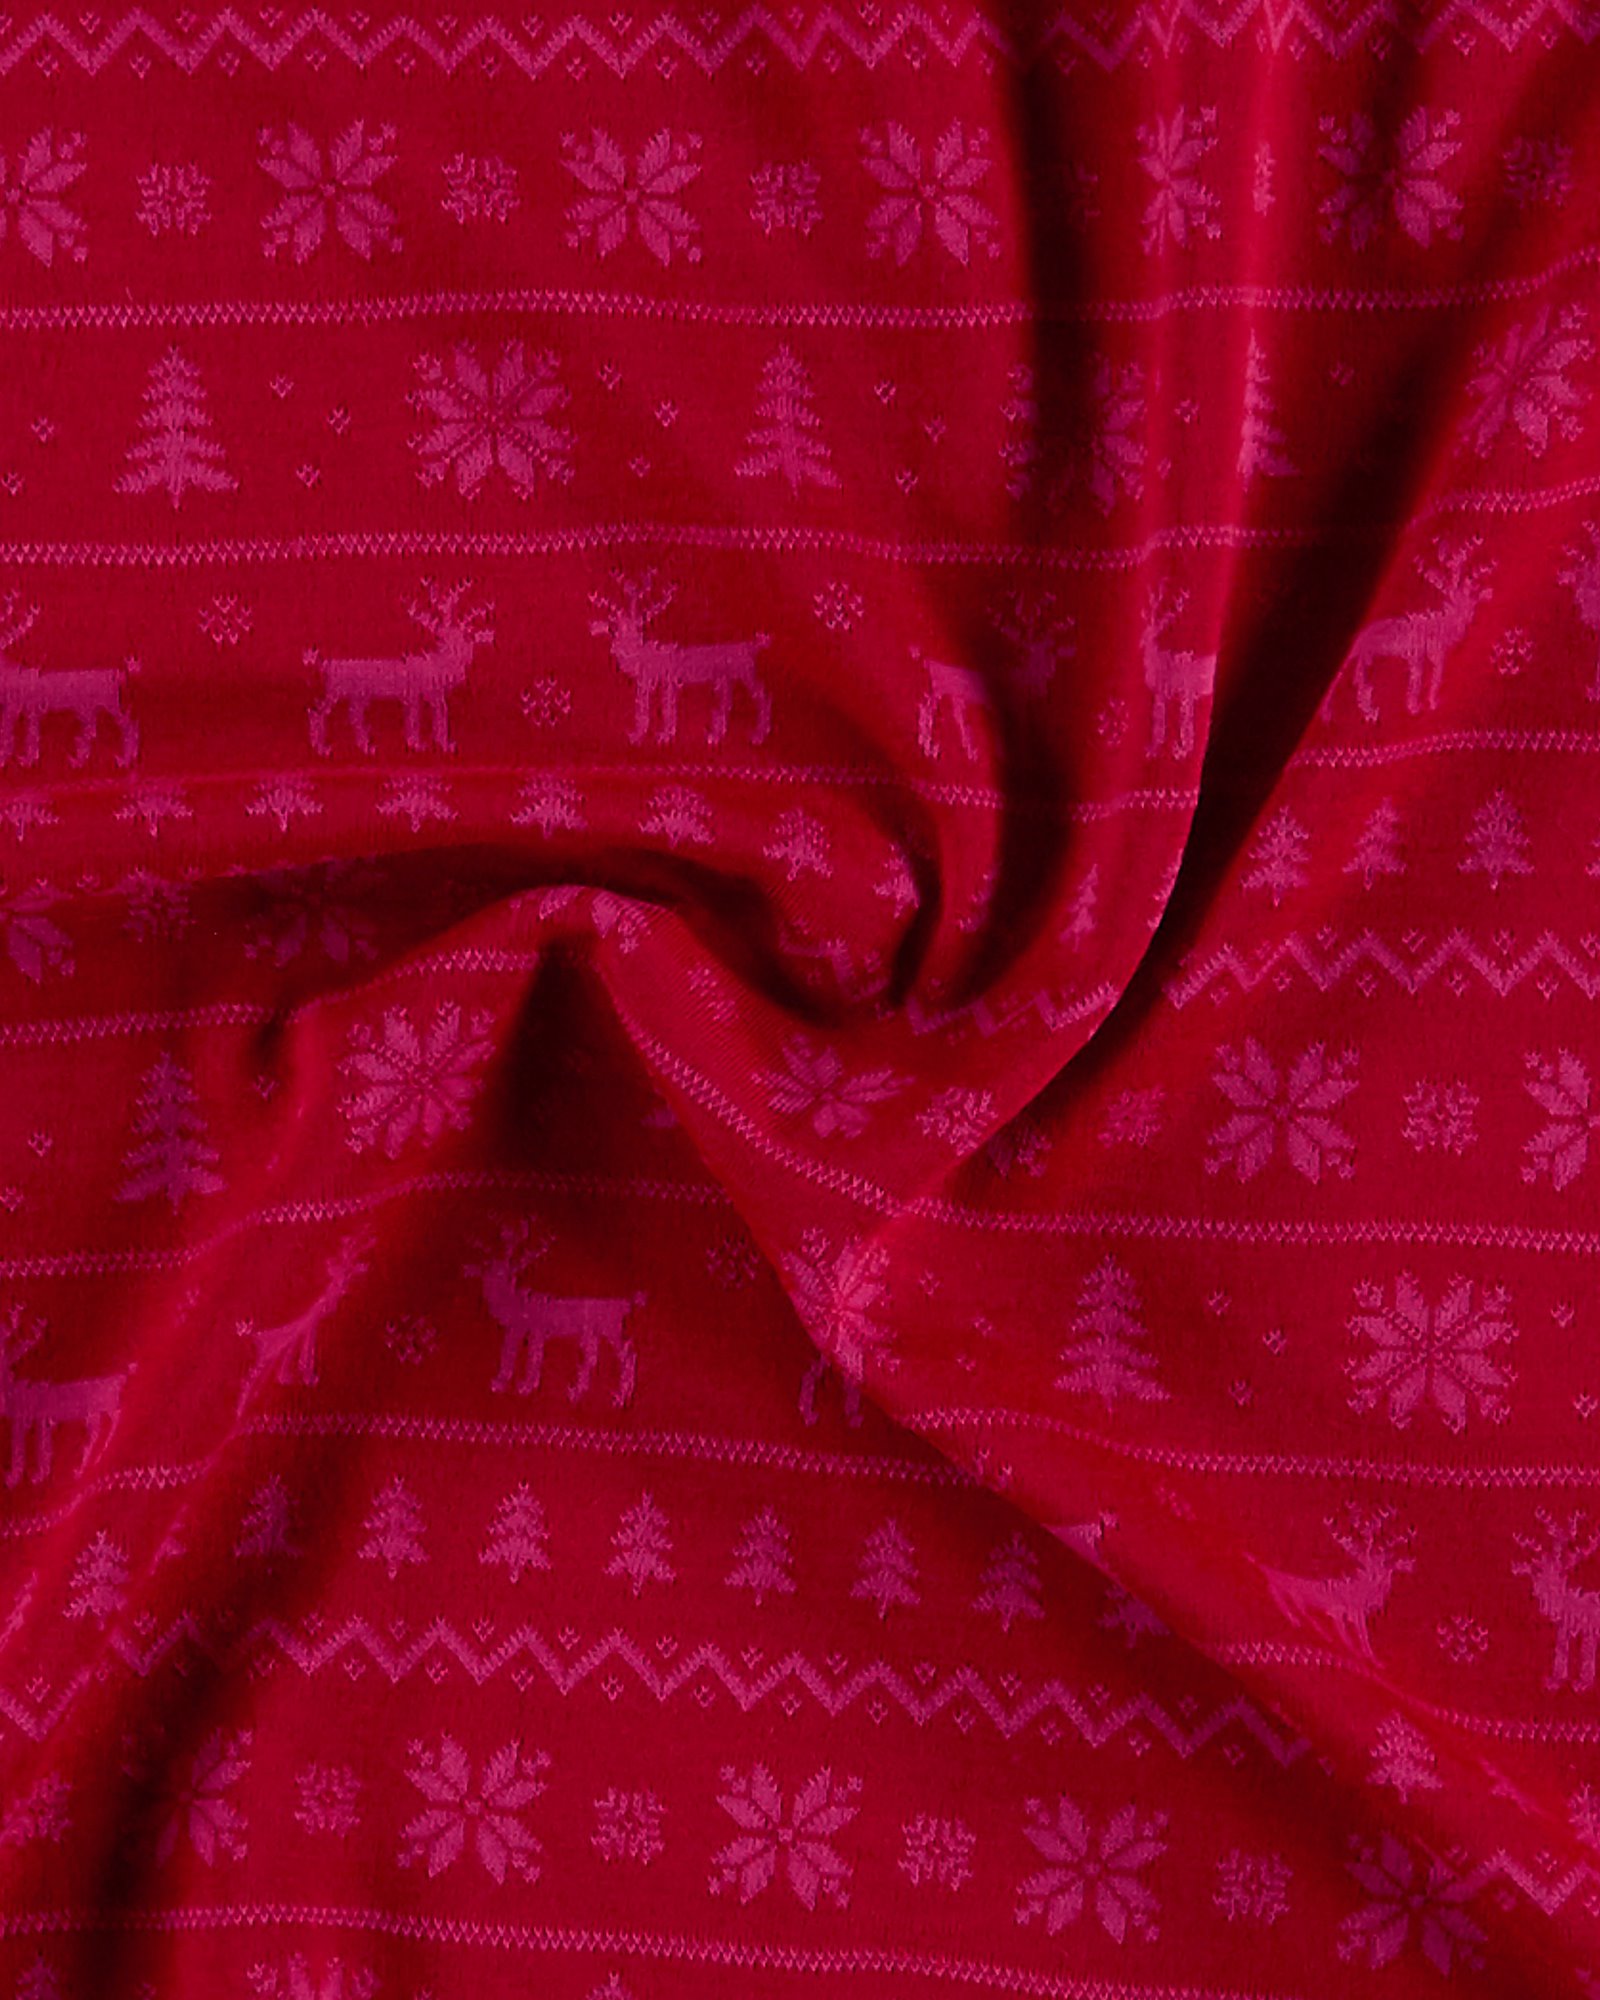 Wool/acrylic jacquard jersey red w deer 273567_pack